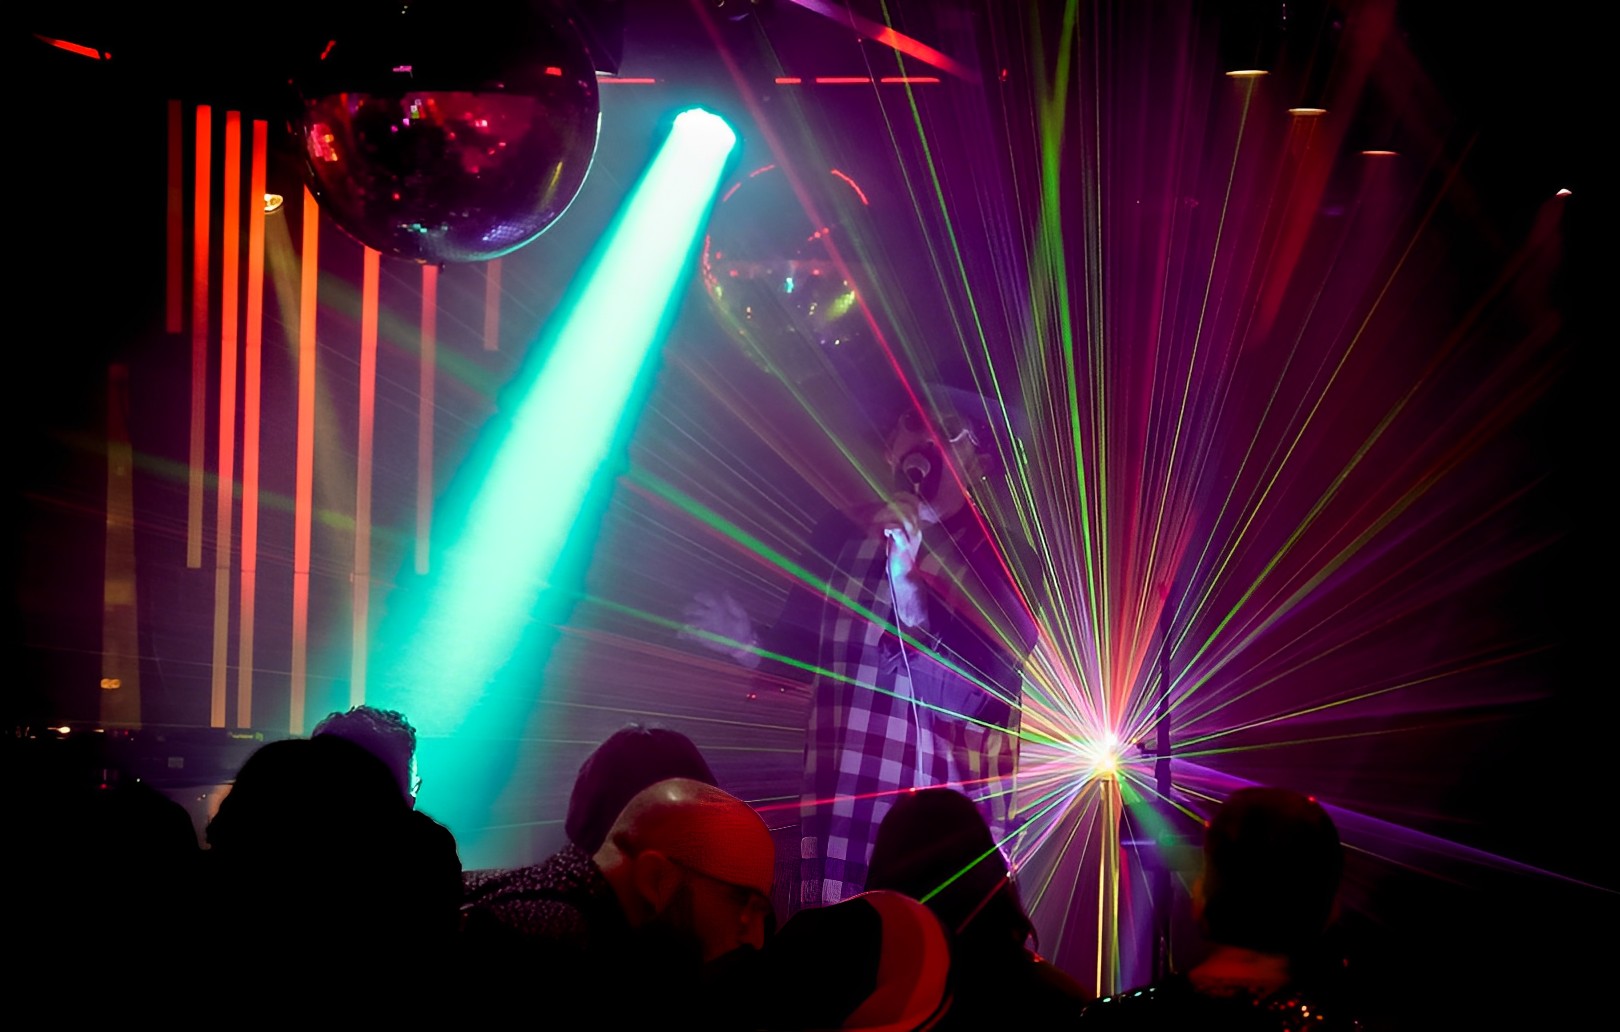 A singer on stage with lasers behind him